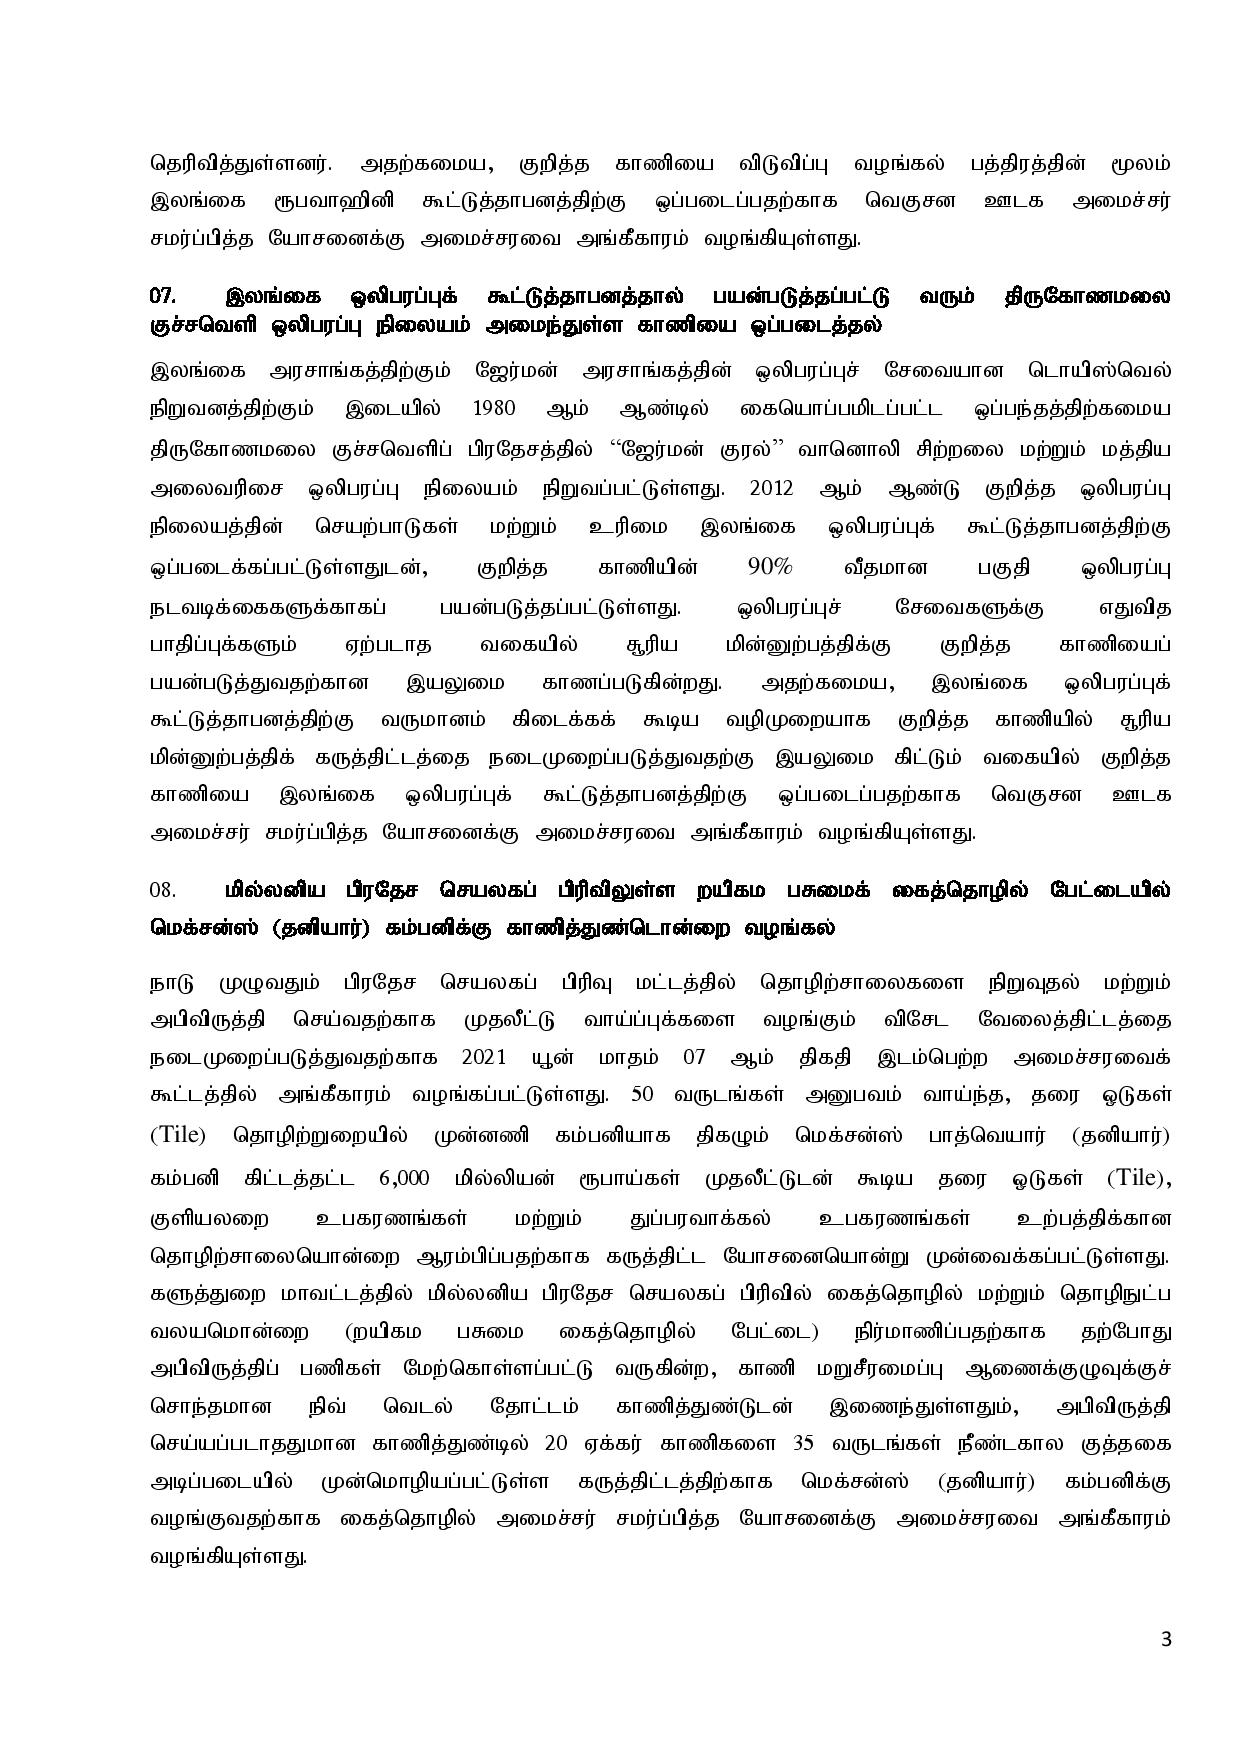 Cabinet Decisions on 18.01.2022 Tamil page 003